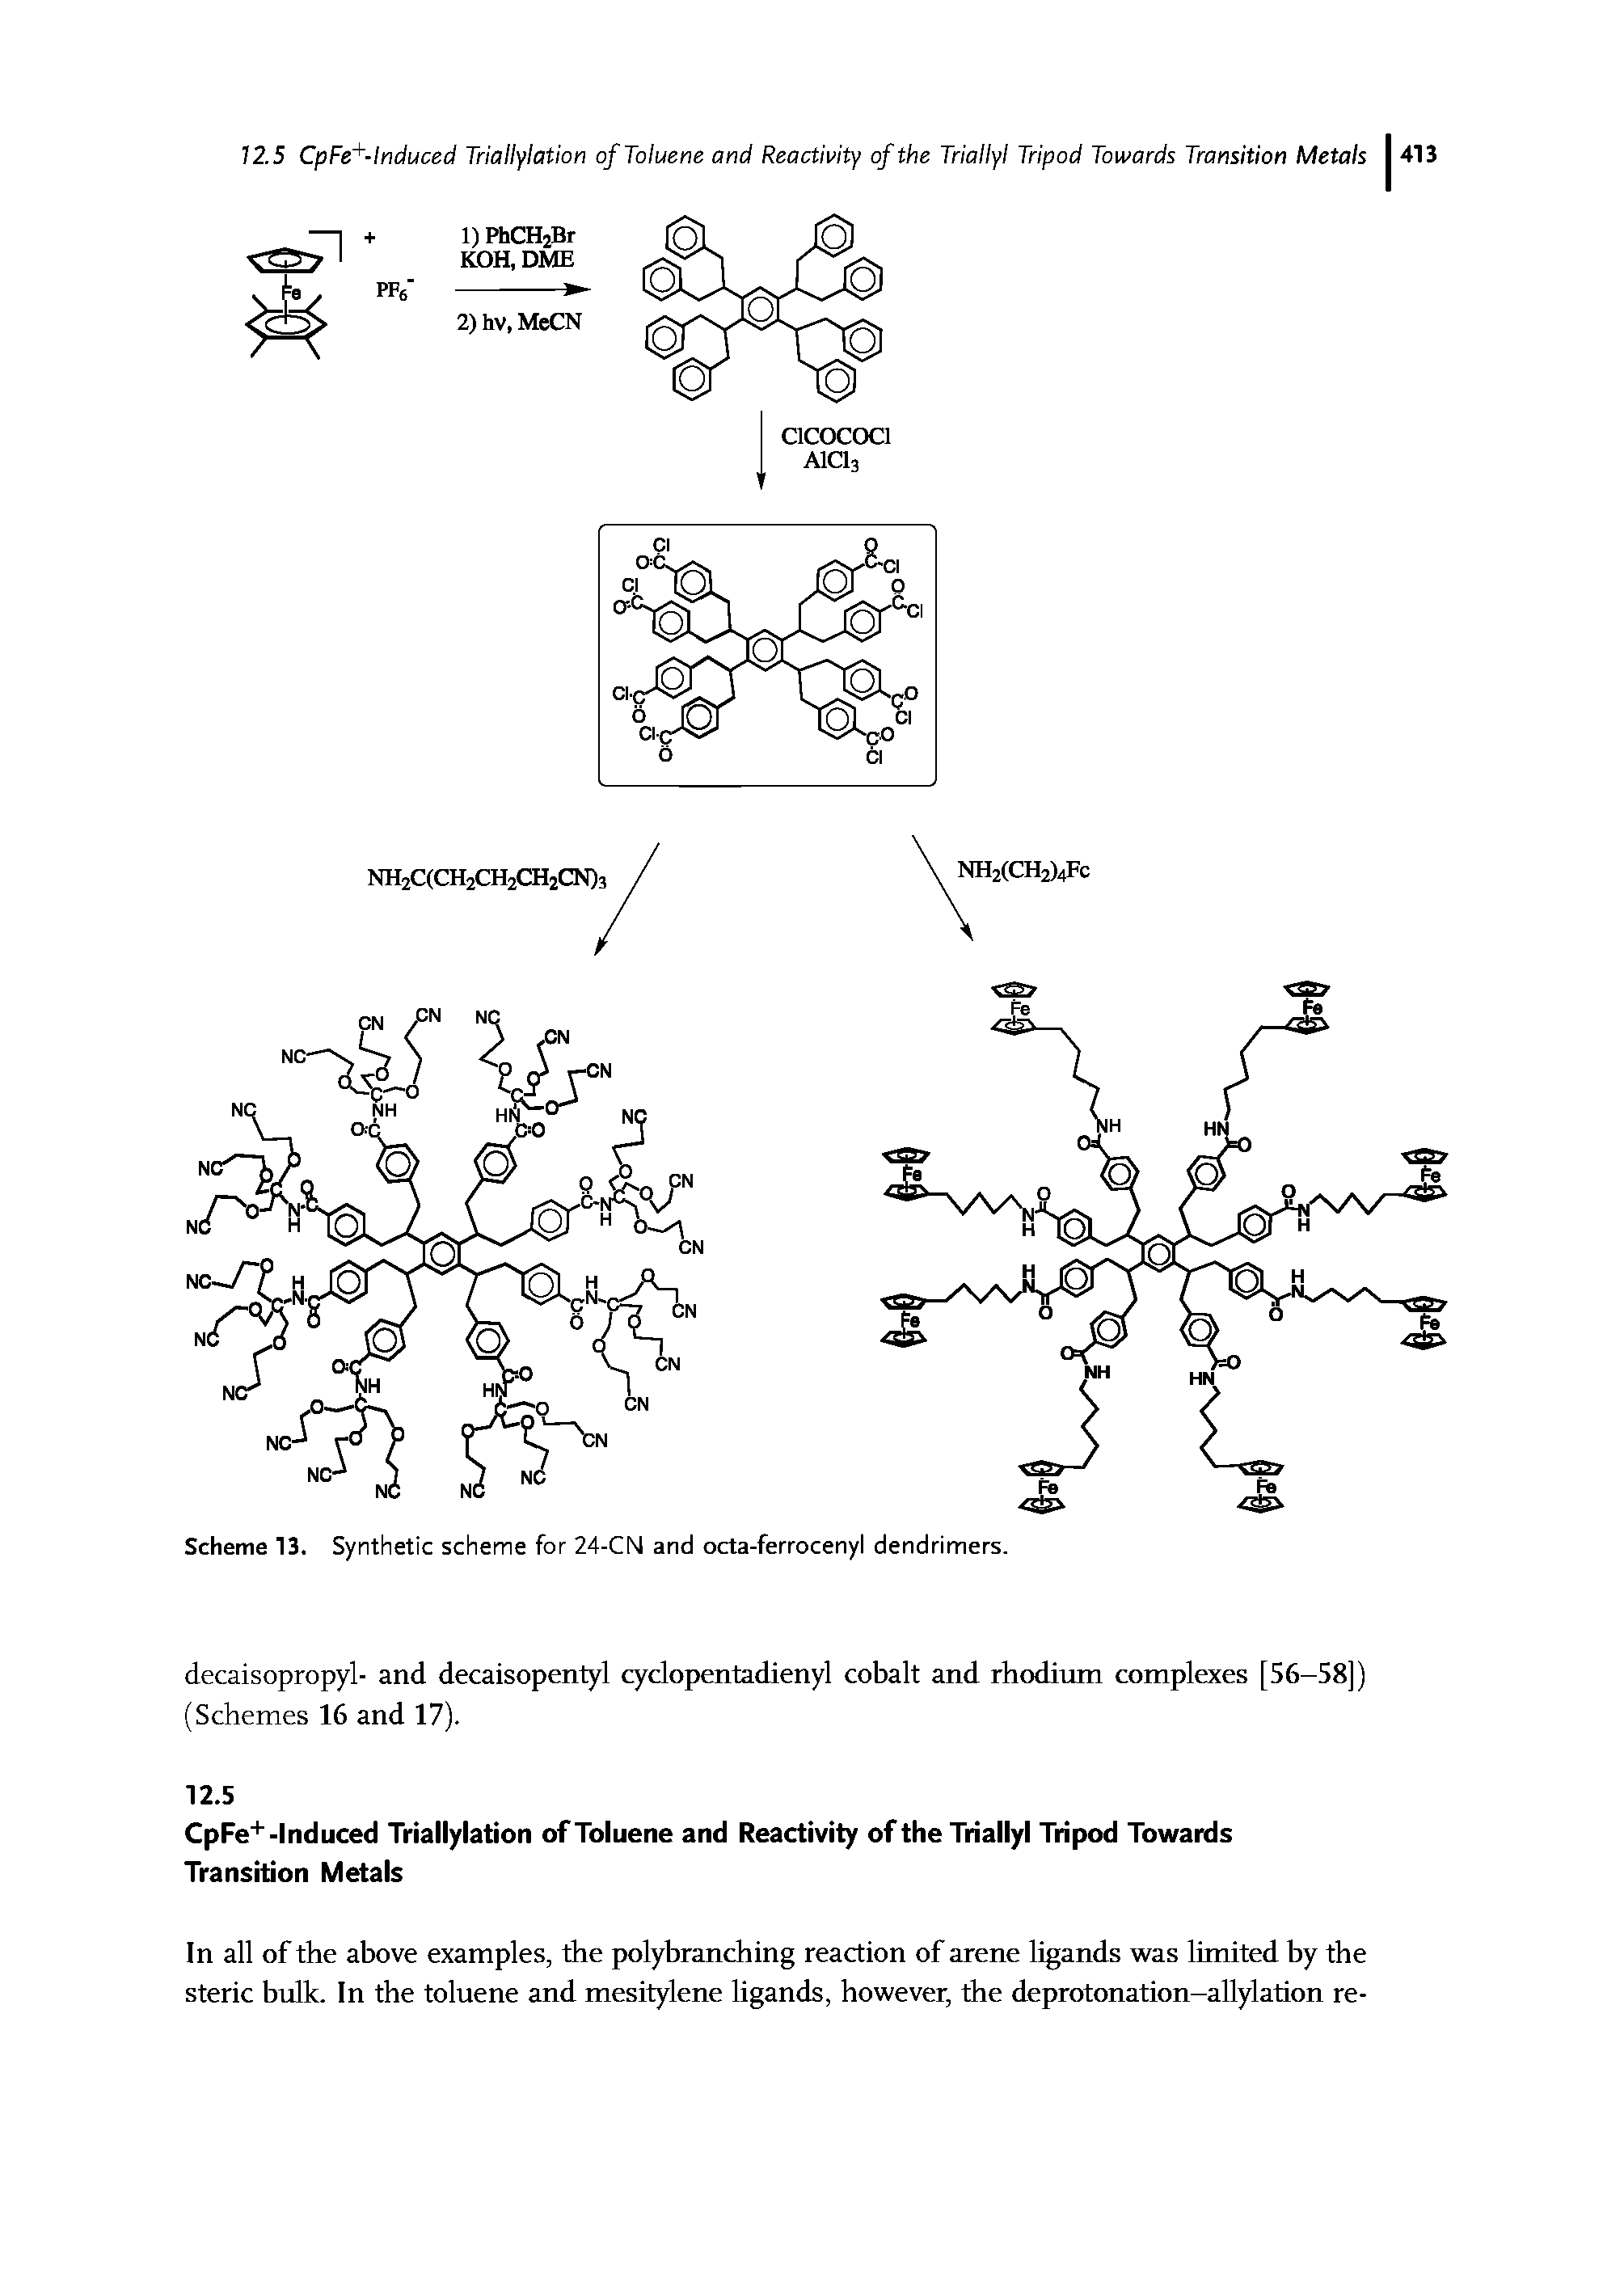 Scheme 13. Synthetic scheme for 24-CN and octa-ferrocenyl dendrimers.